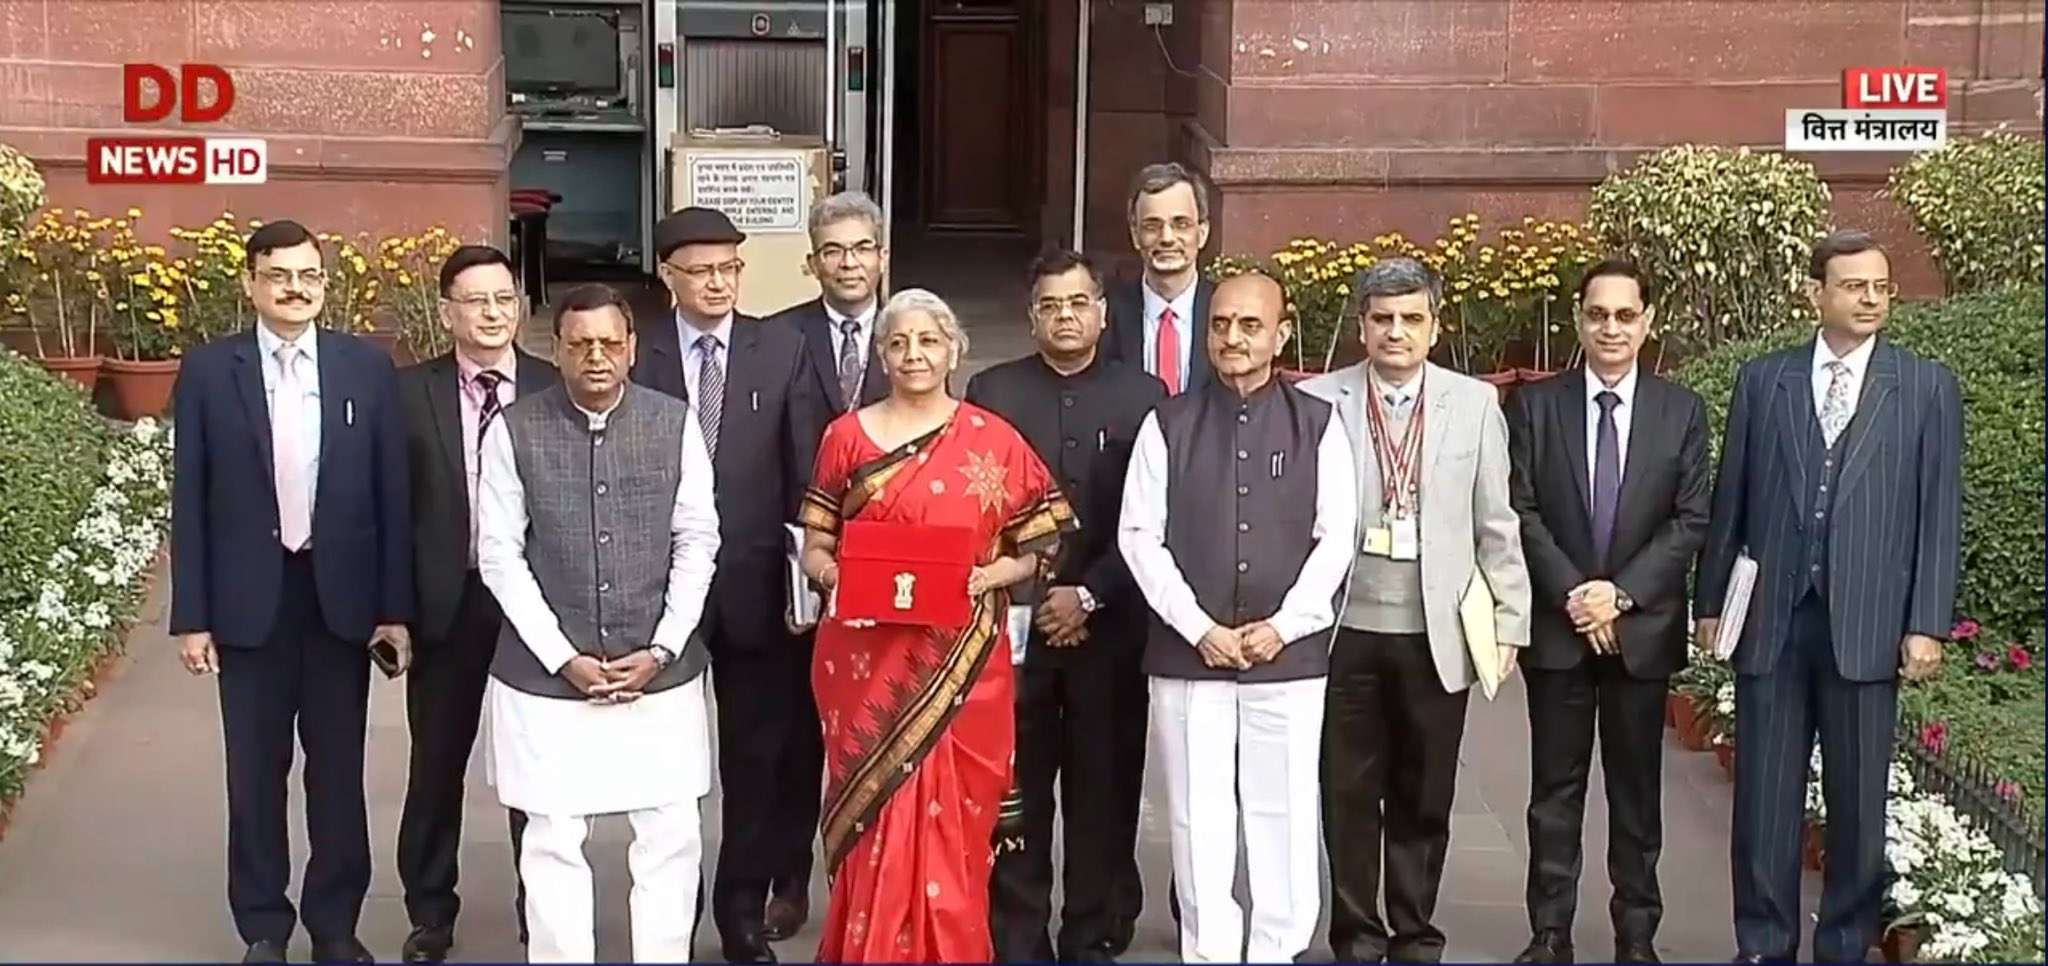 CBIC refers to Budget 2023 for this year as the "#AmritKaalBudget"

Here is the Budget 2023 team at the Parliament with the Union FM.